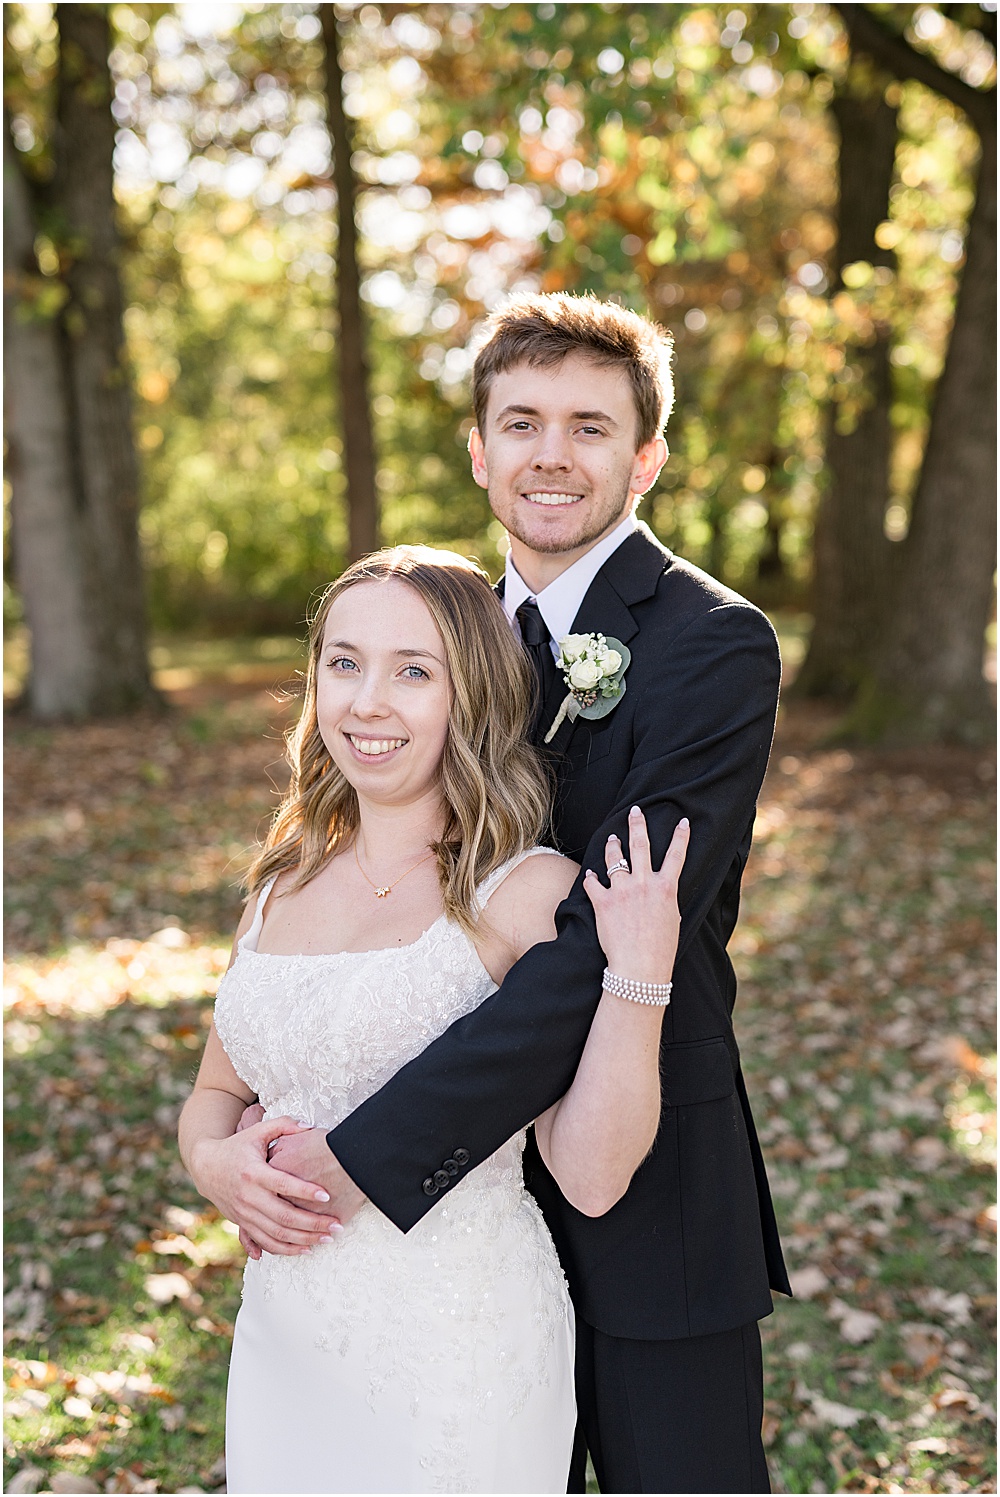 Bride and groom smiling toward camera during wedding photos at Coxhall Gardens in Carmel, Indiana